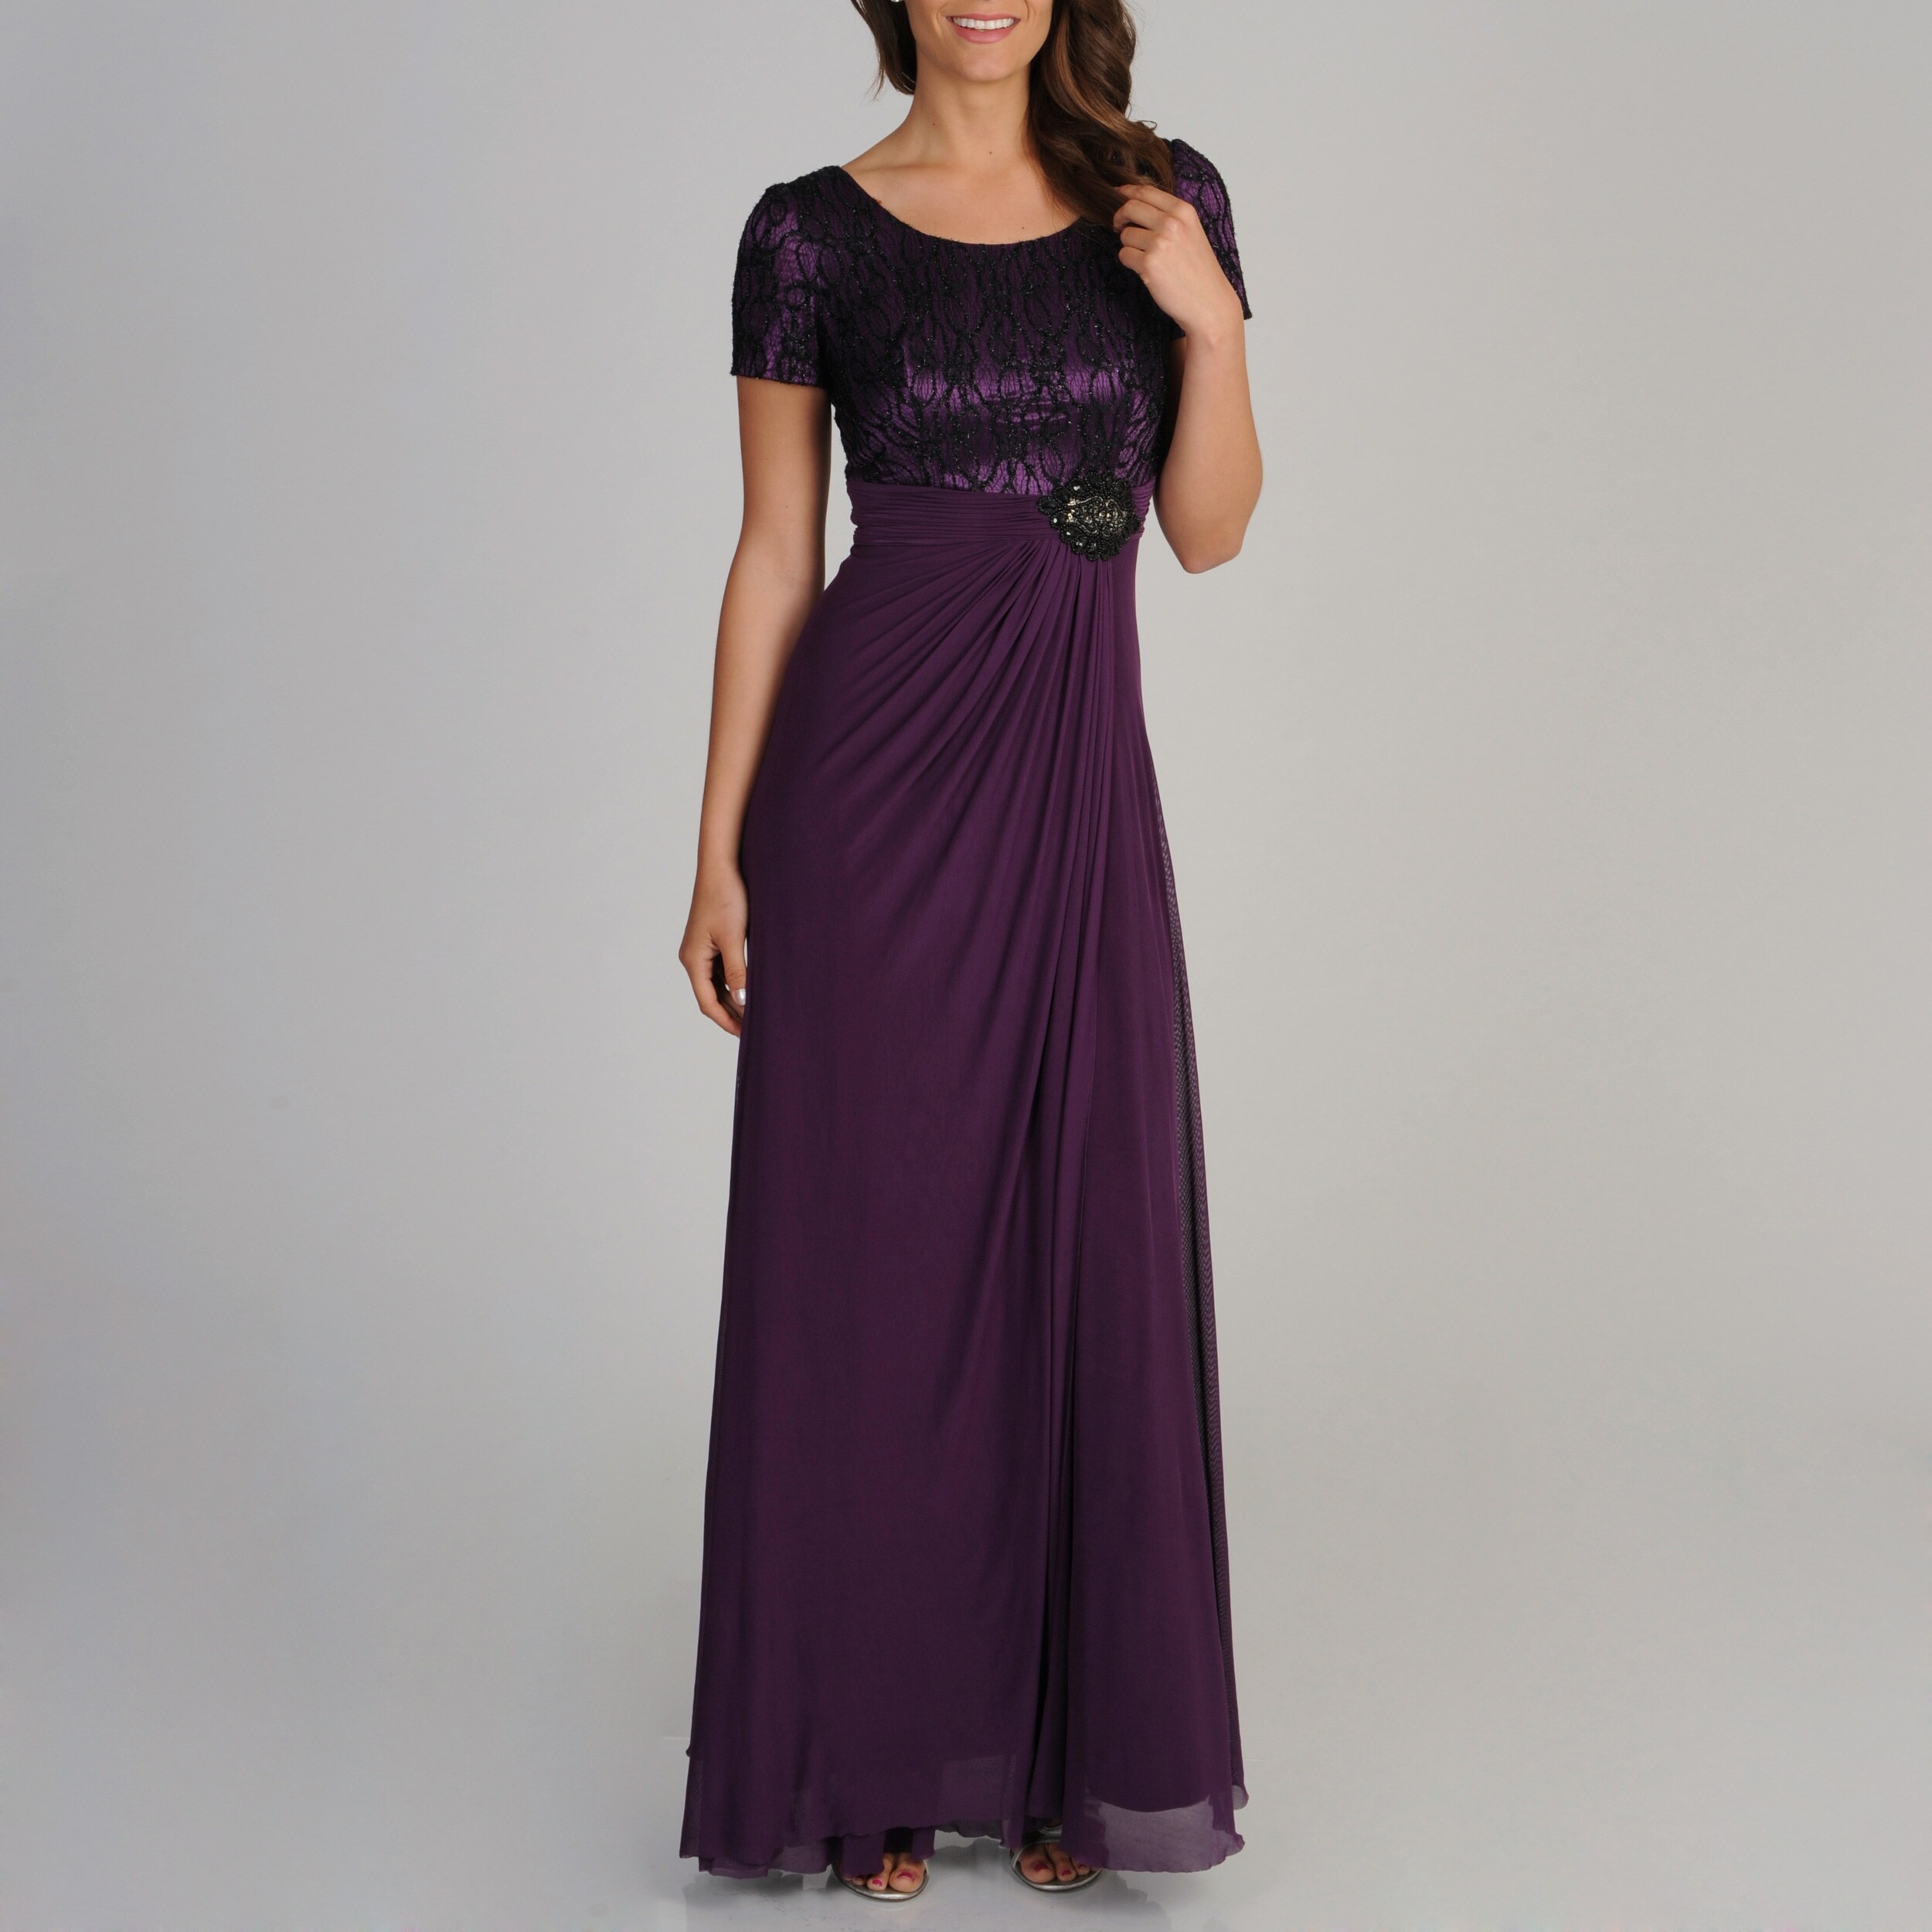 Shop Decode 1.8 Women's Plum Novelty Swirl Embroidered Gown - Free ...